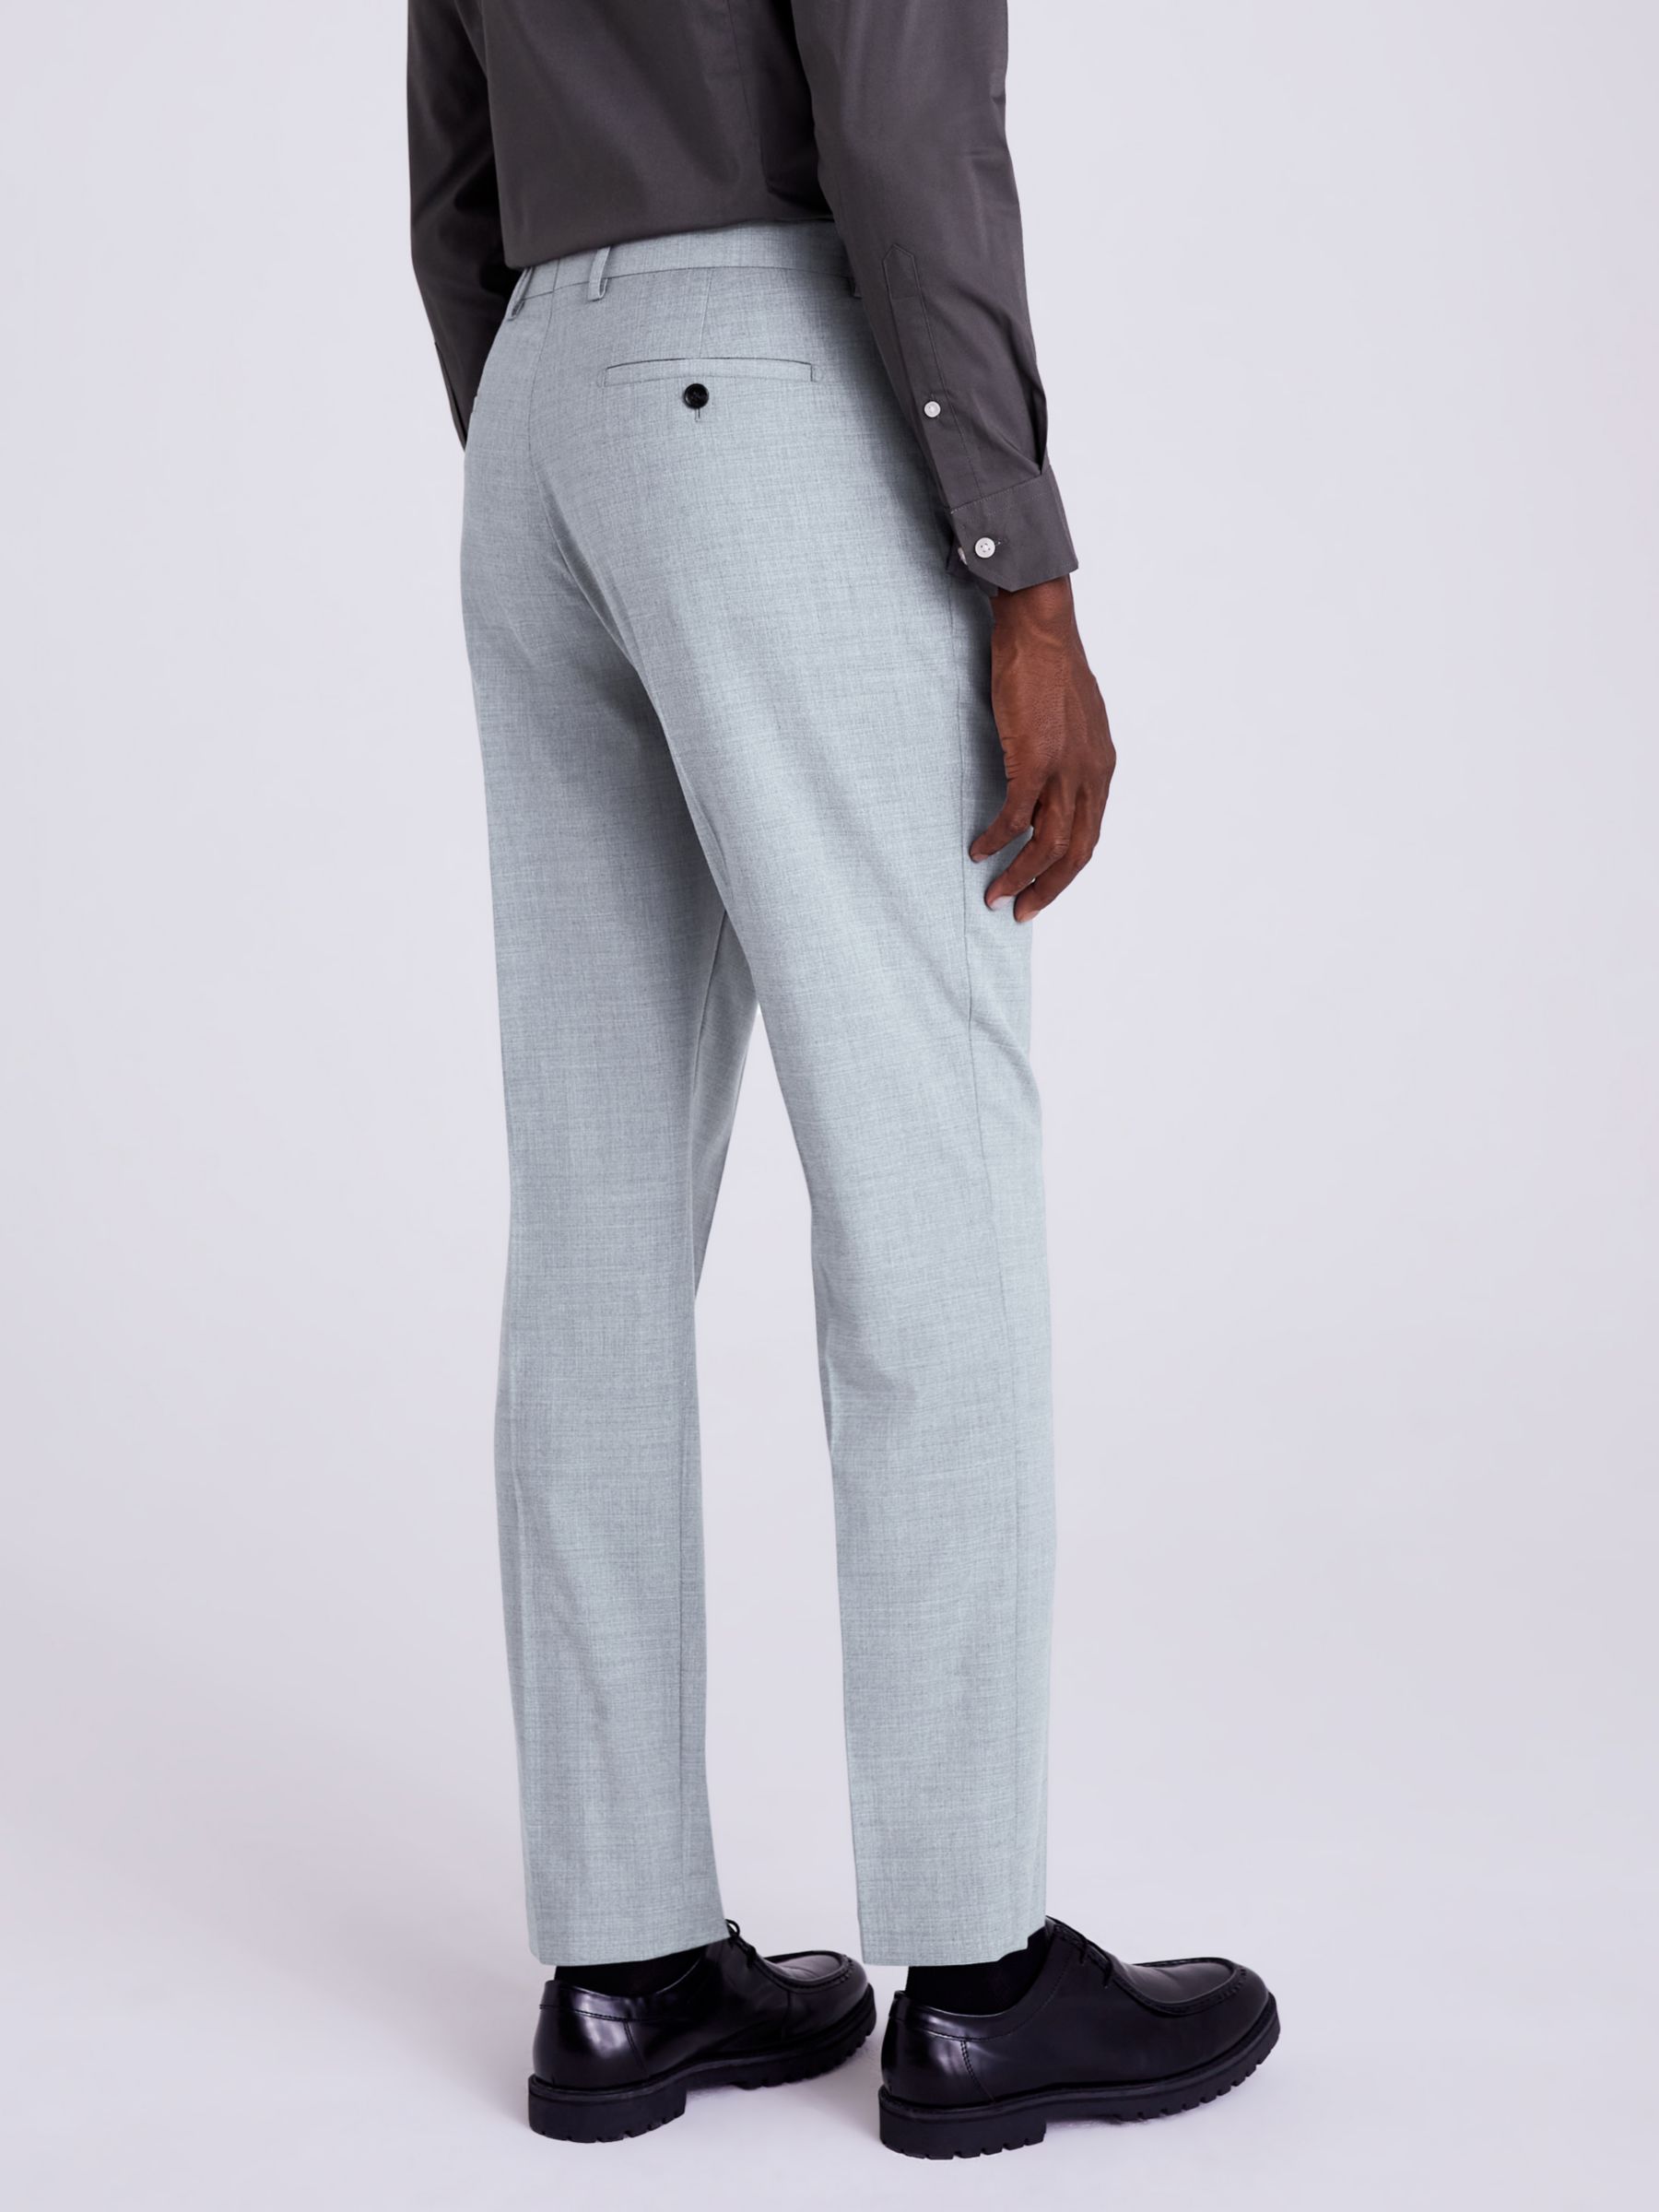 Moss Tailored Stretch Trousers, Grey, 30S